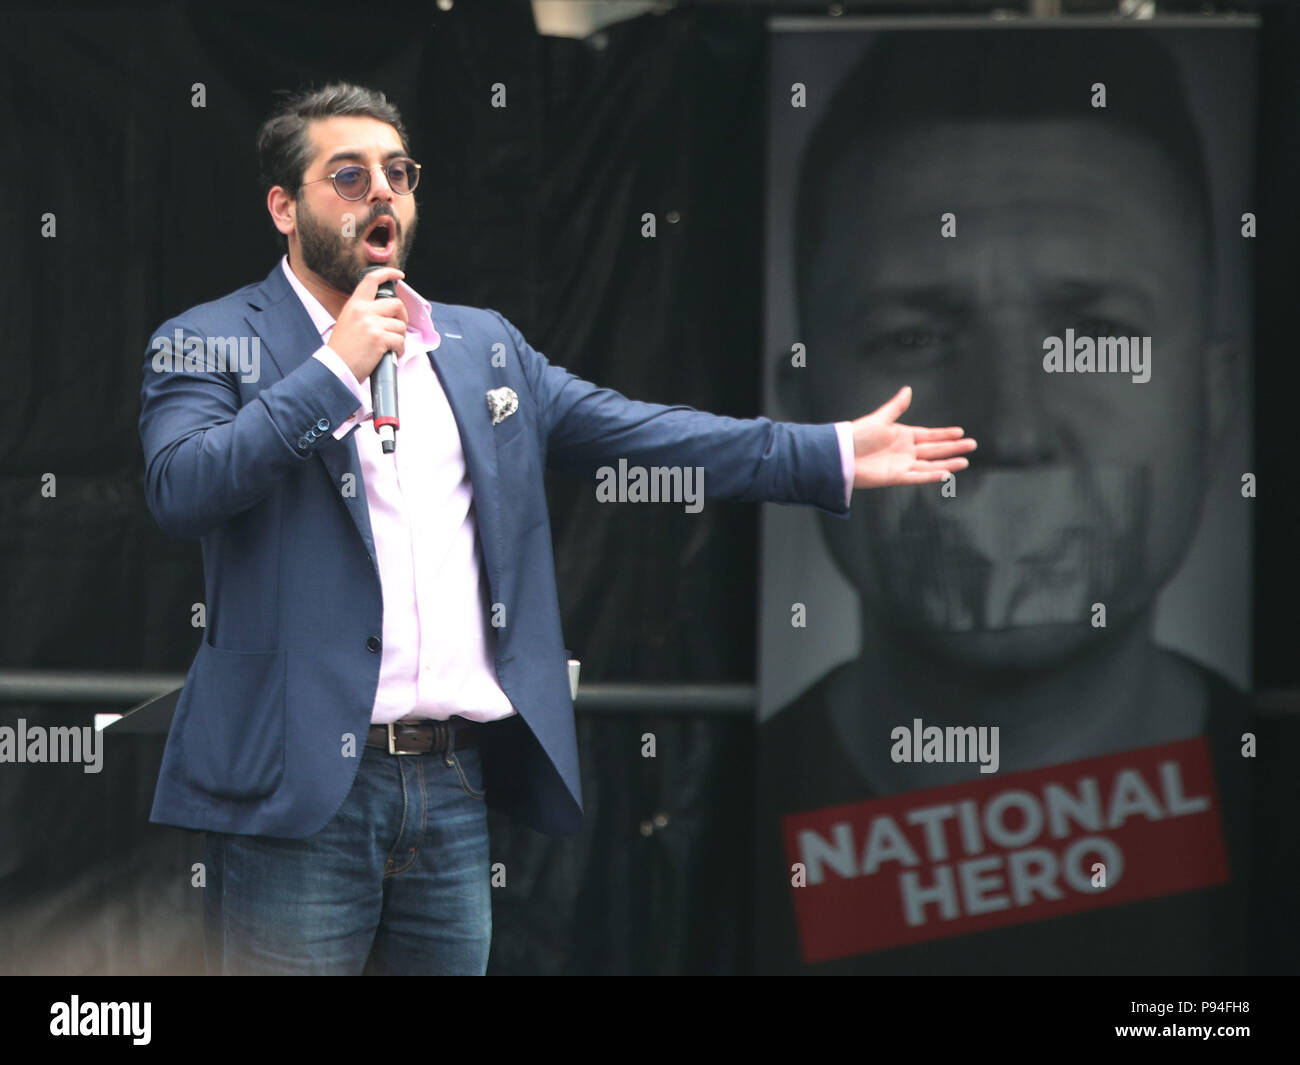 Raheem Kassam, former chief advisor to UK Independence Party leader Nigel Farage, and former editor-in-chief of Breitbart News London, on stage during a Free Tommy Robinson and Pro-Trump joint rally Whitehall, London, suporting the visit of the US President Donald Trump to the UK and calling for the release of jailed Tommy Robinson. Stock Photo